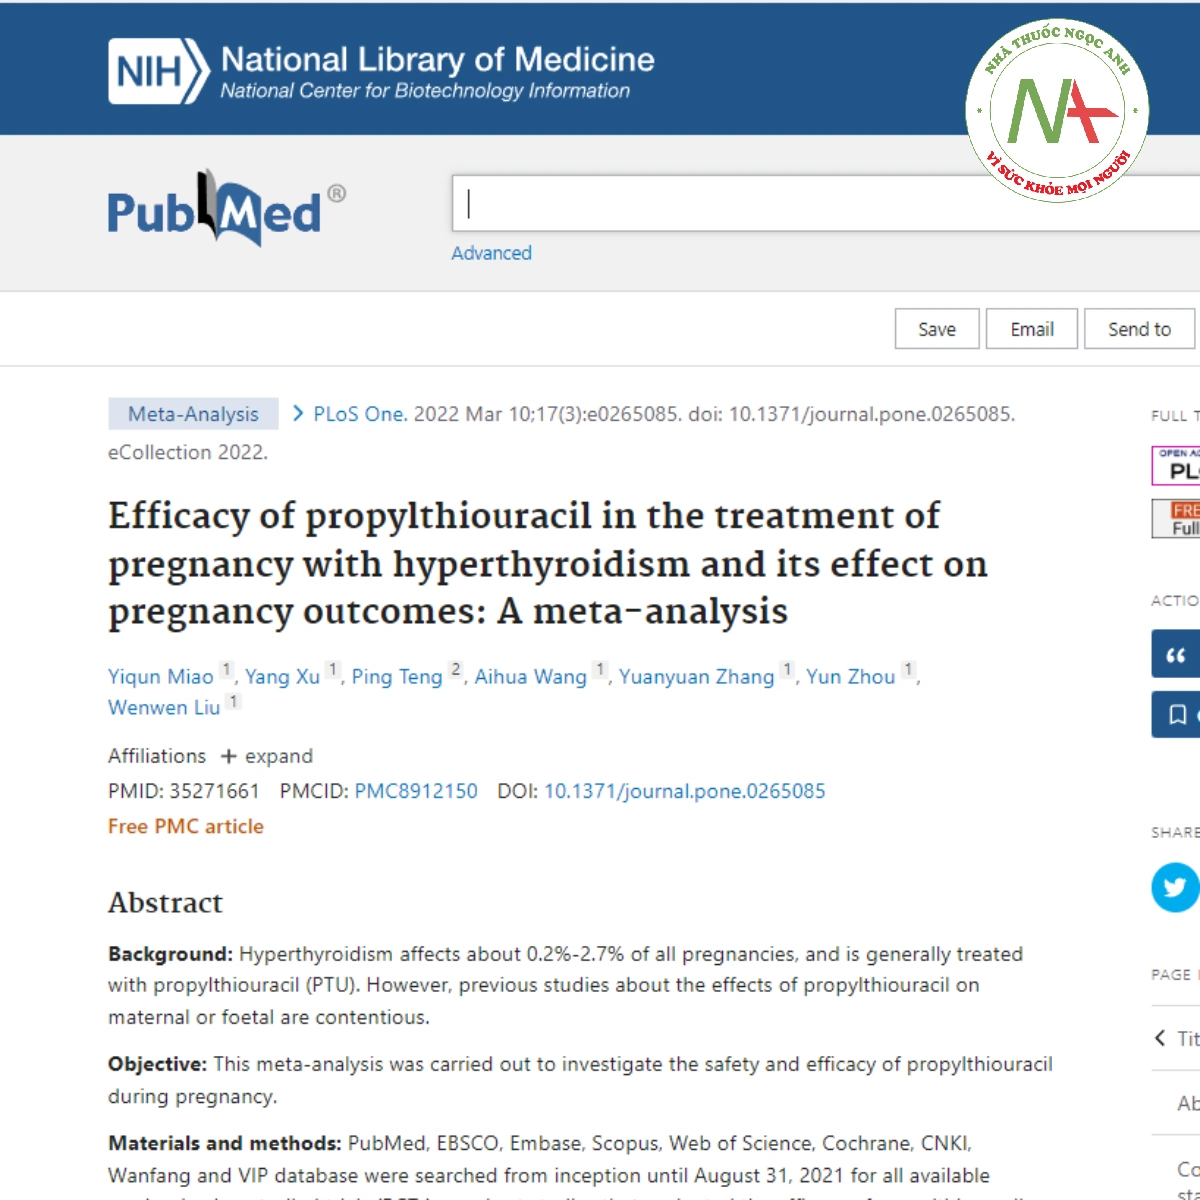 Efficacy of propylthiouracil in the treatment of pregnancy with hyperthyroidism and its effect on pregnancy outcomes_ A meta-analysis